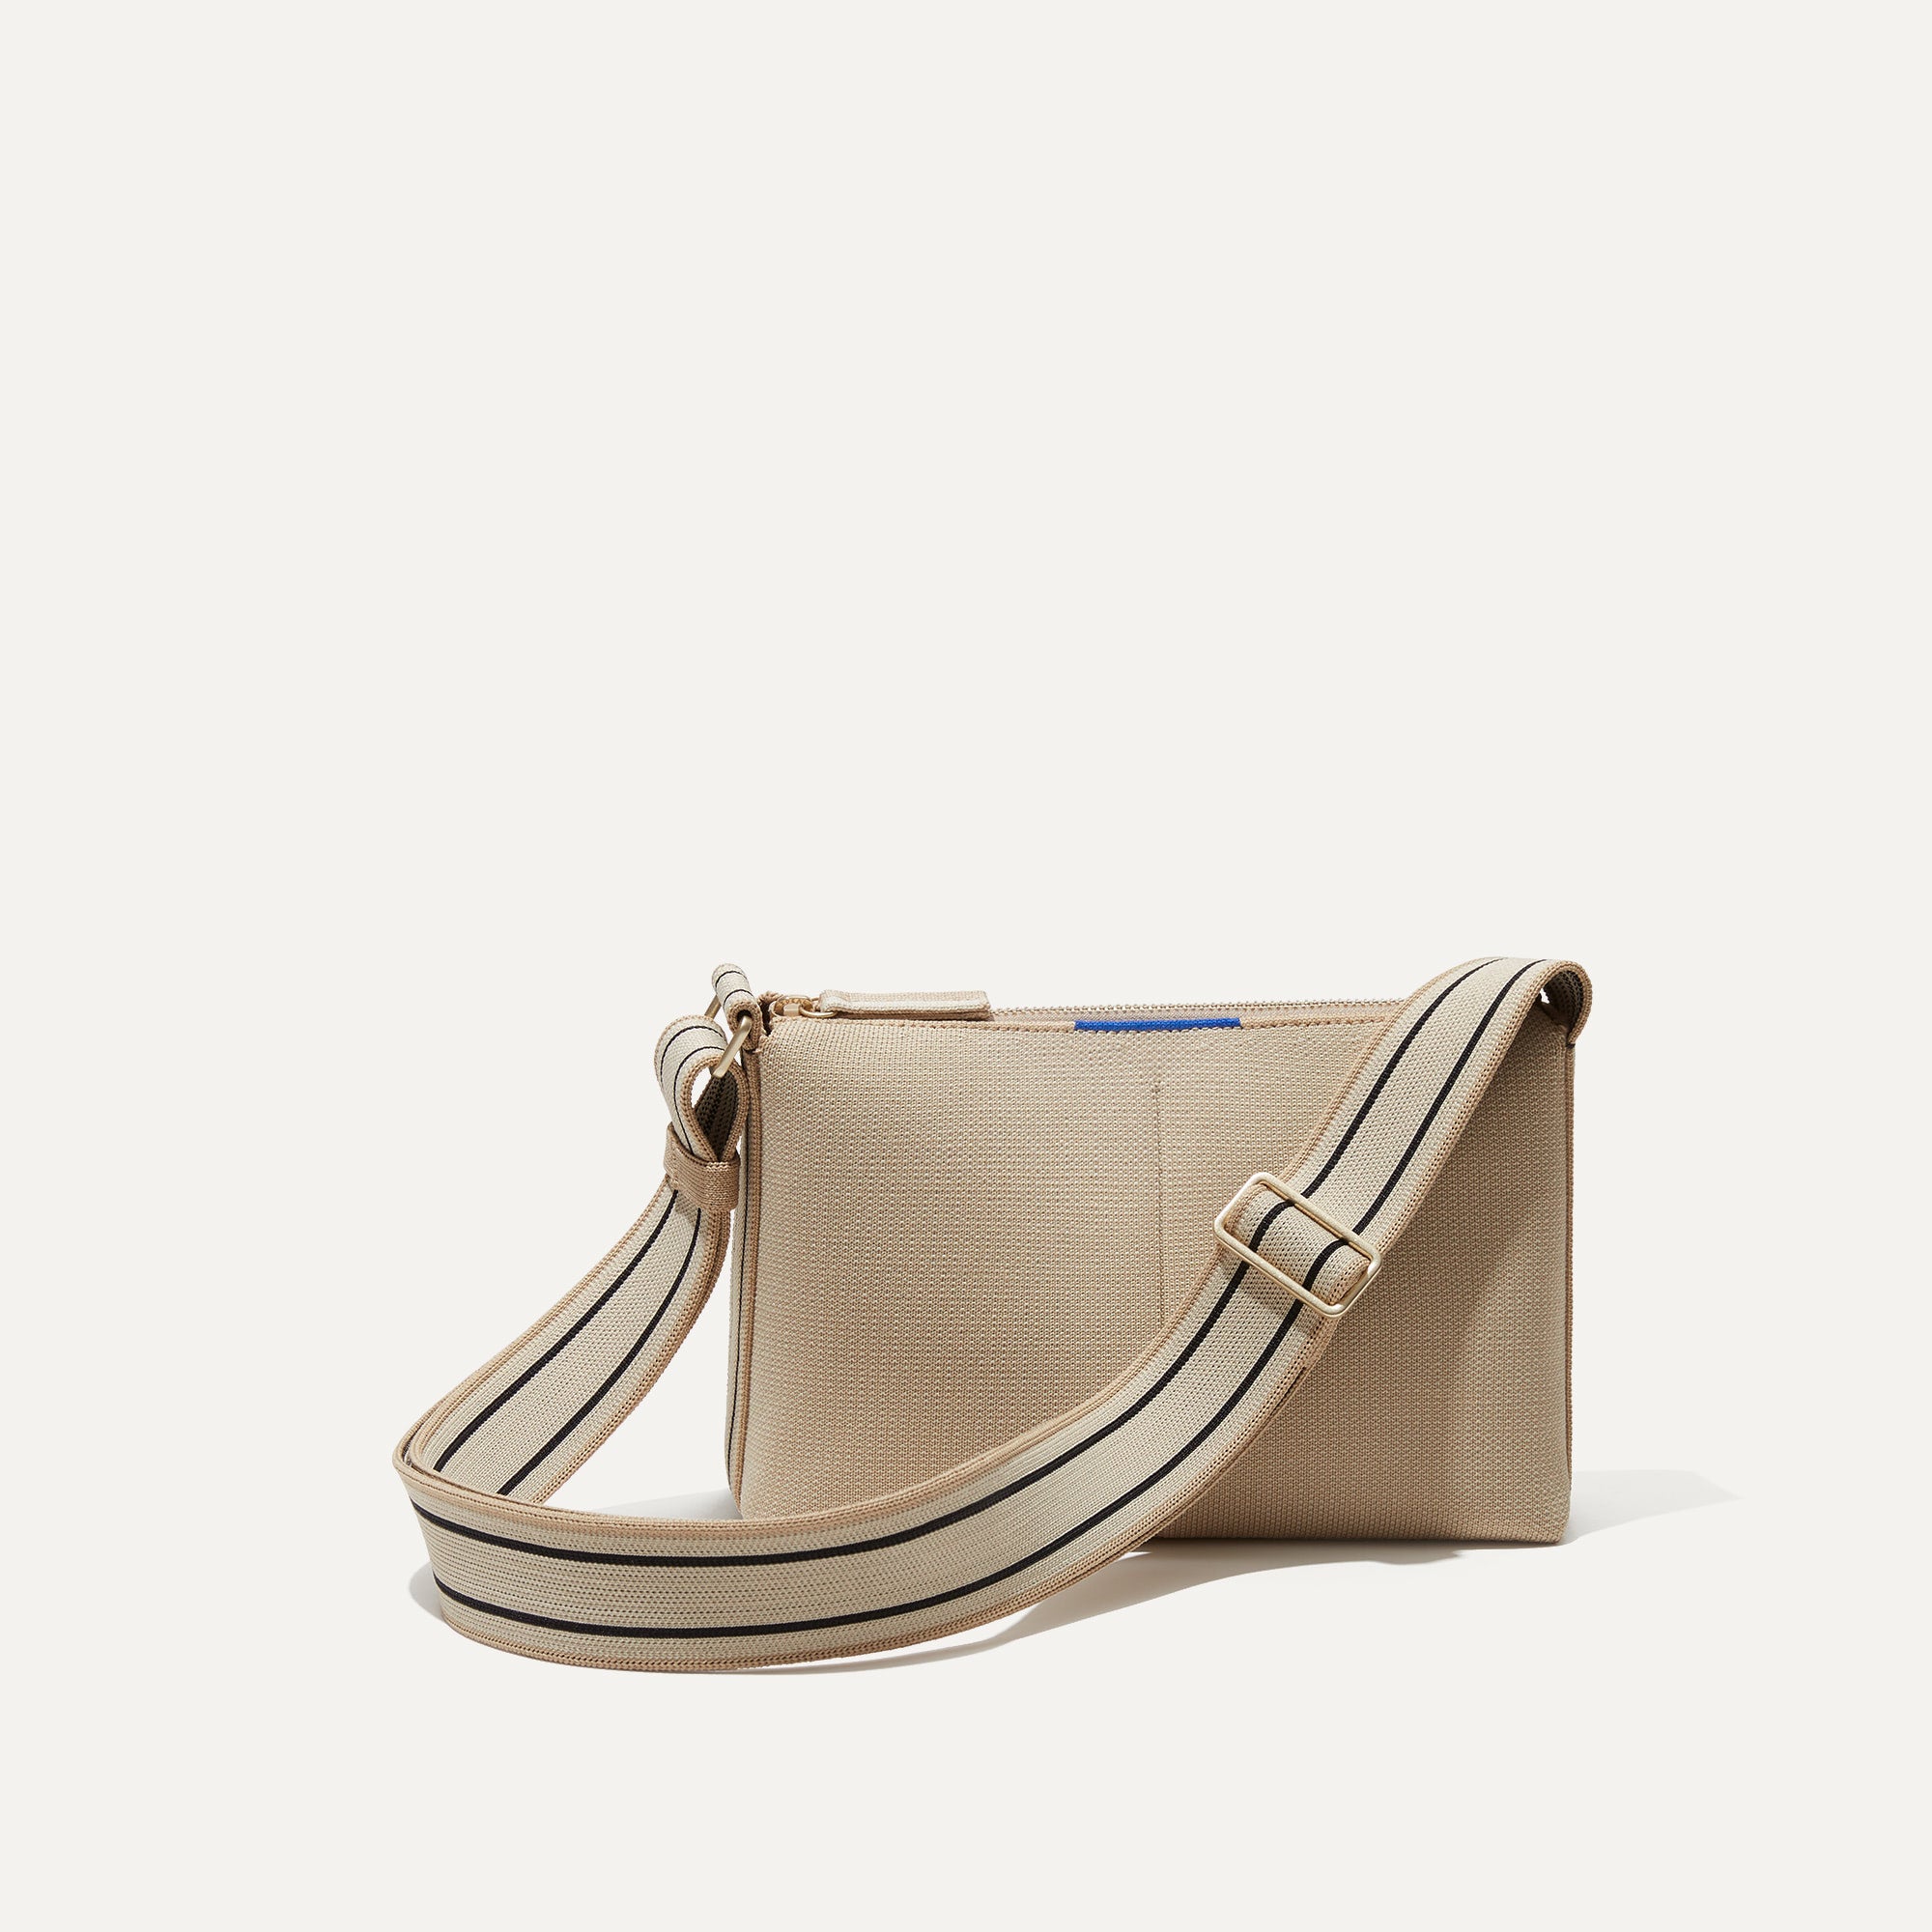 Rothy's - The Casual Crossbody in Brown/Neutral